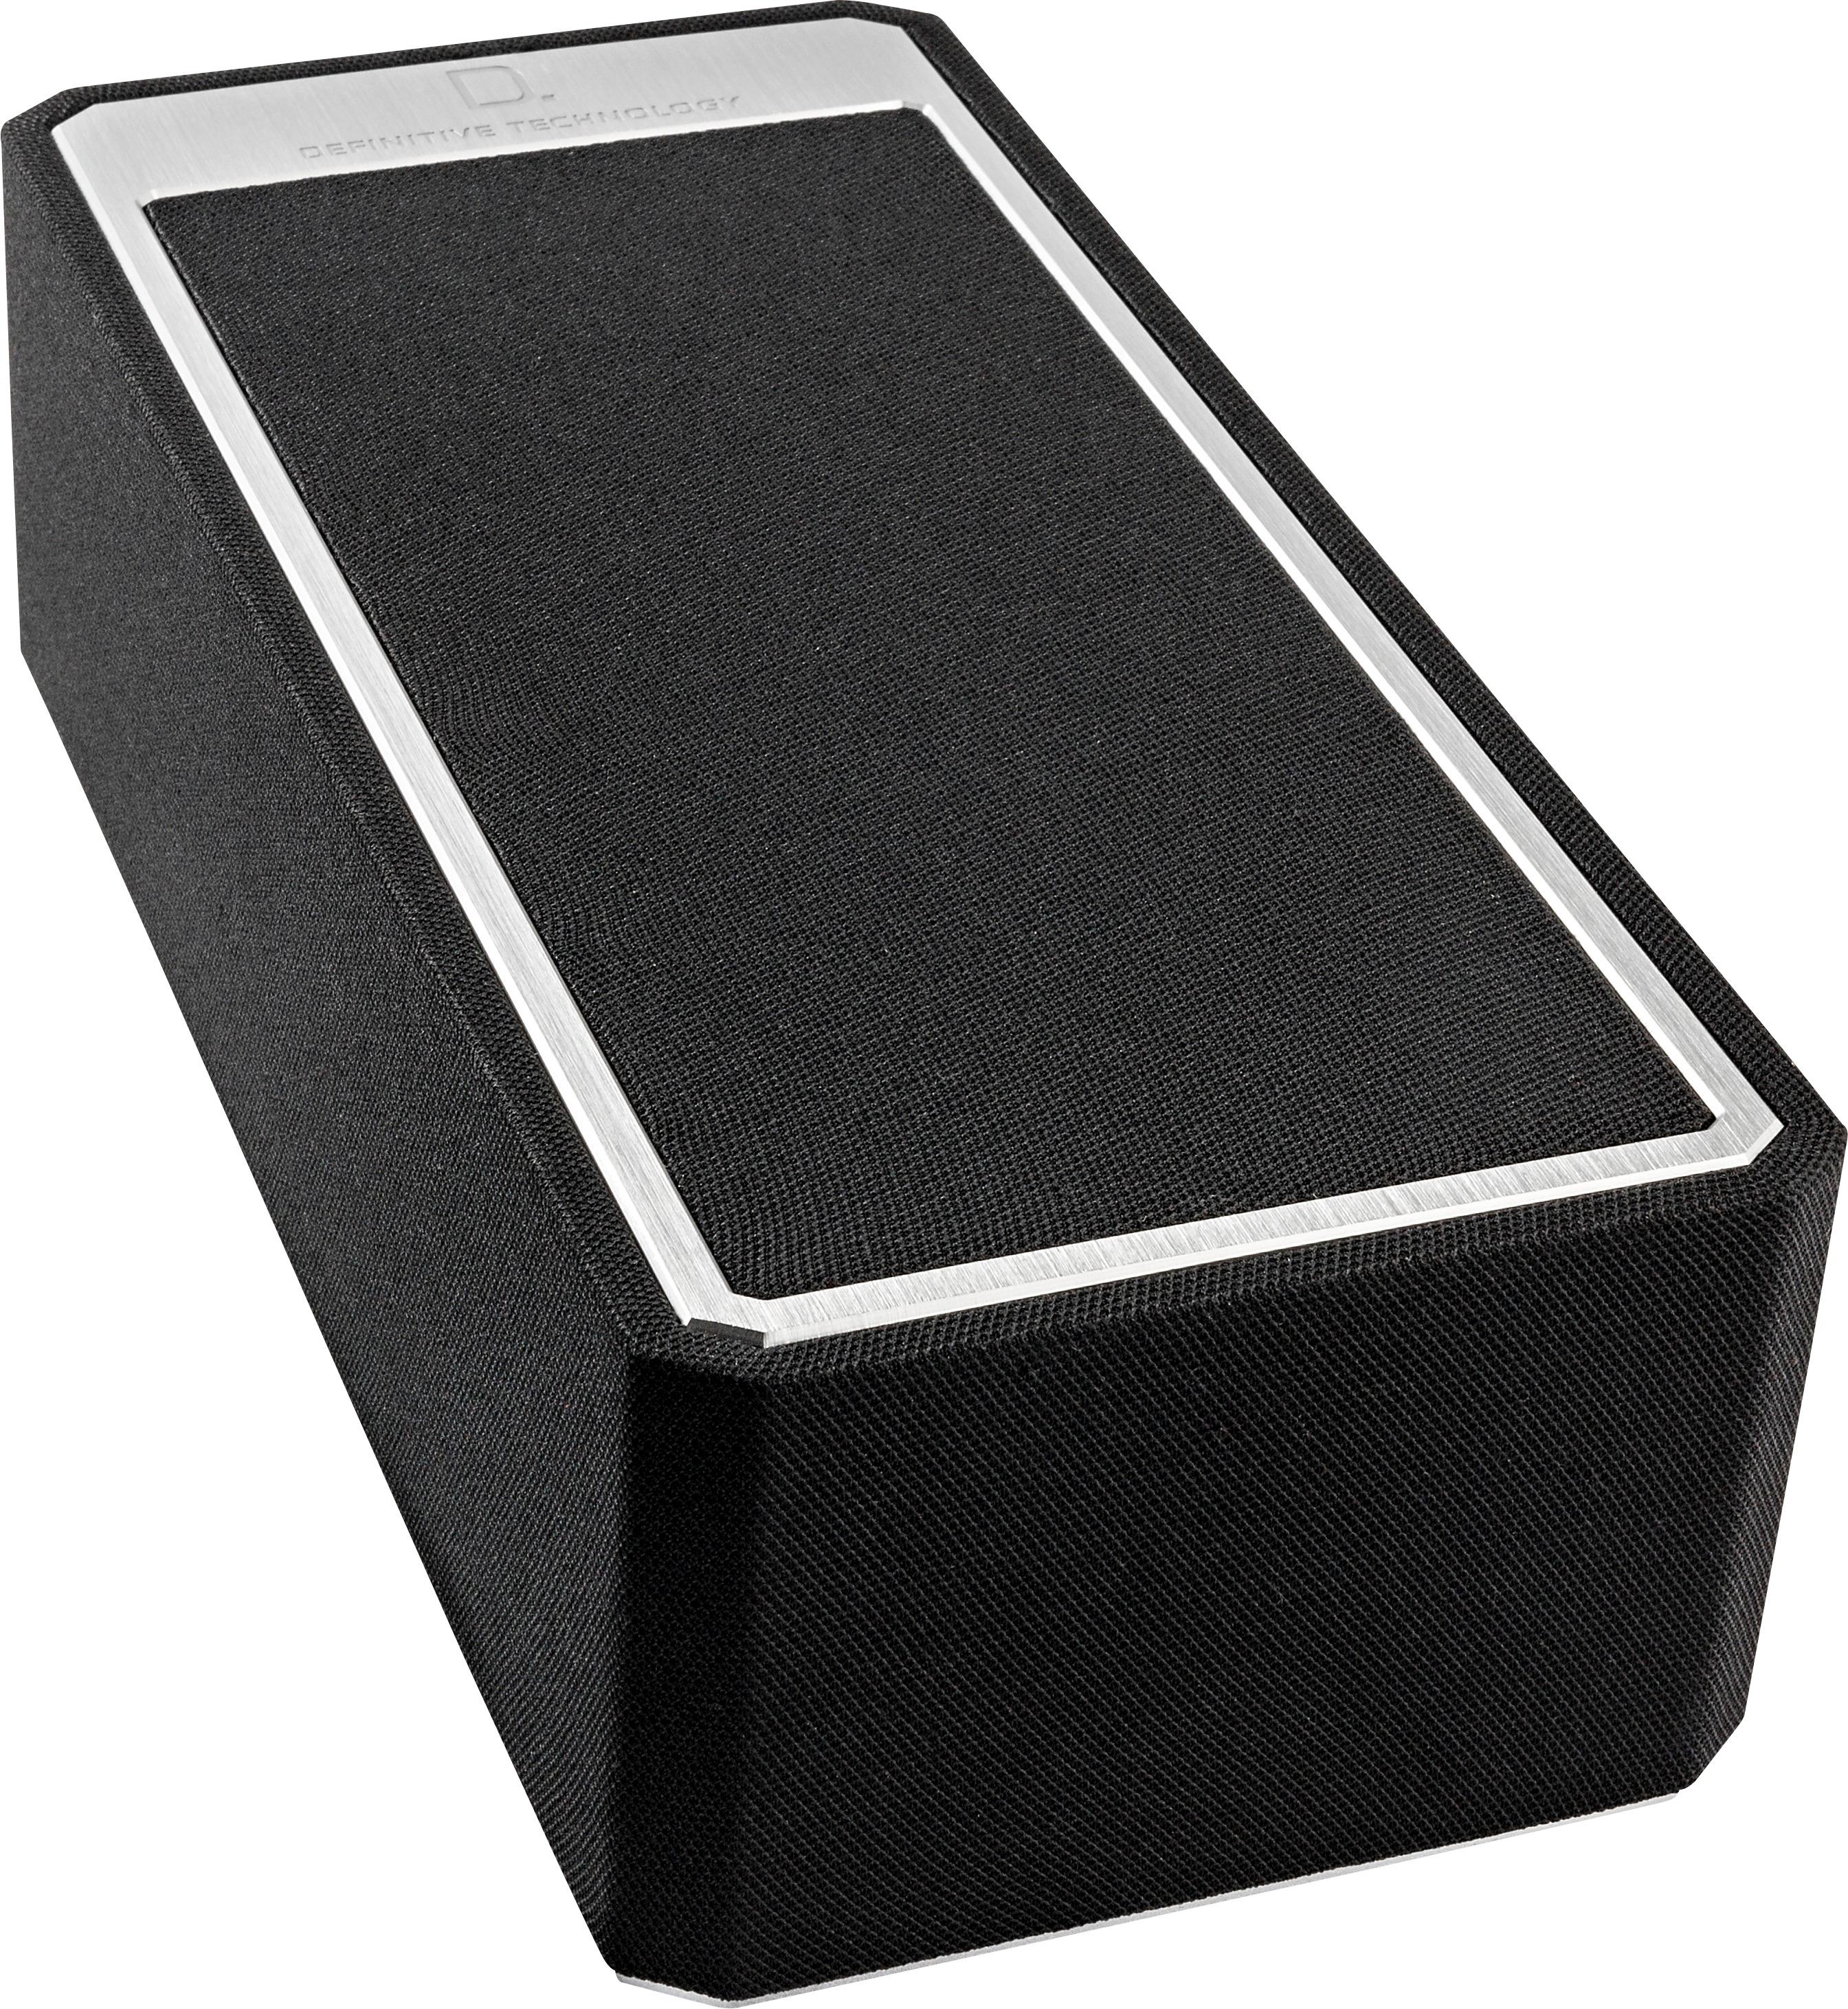 Angle View: Definitive Technology - High-Performance 2-way Height Speaker Module - Black